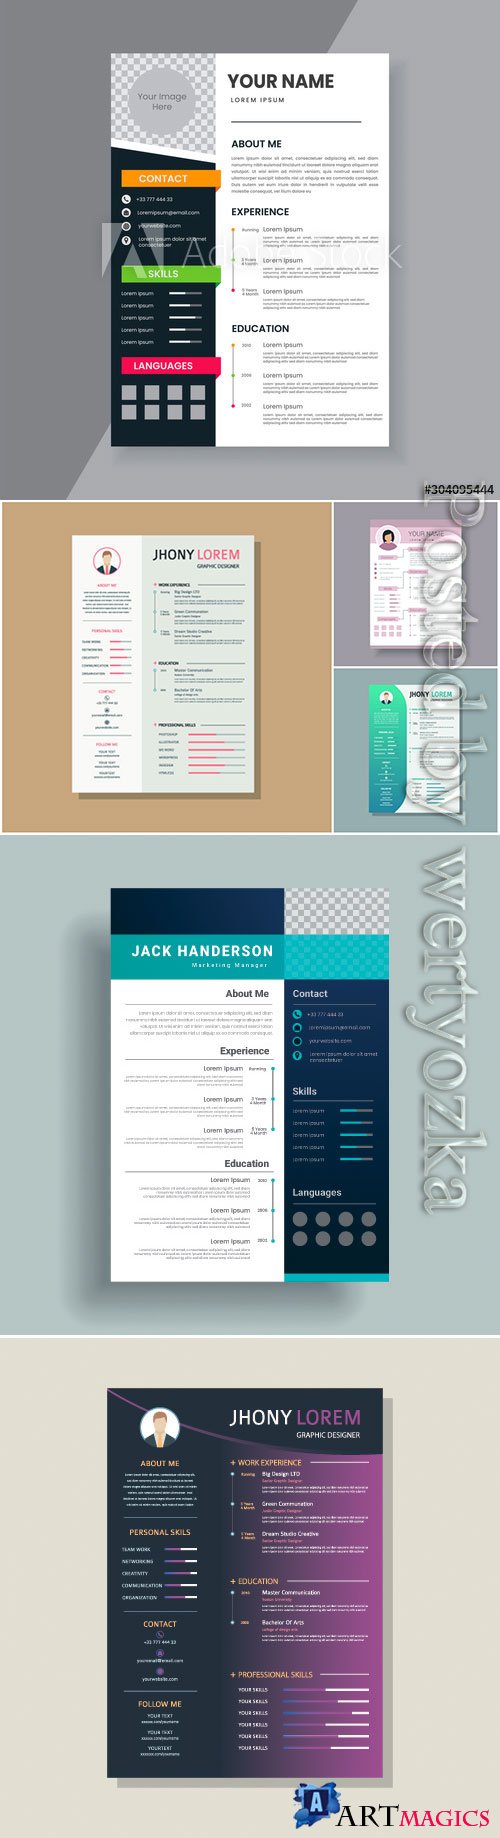 Creative resume and template vector design